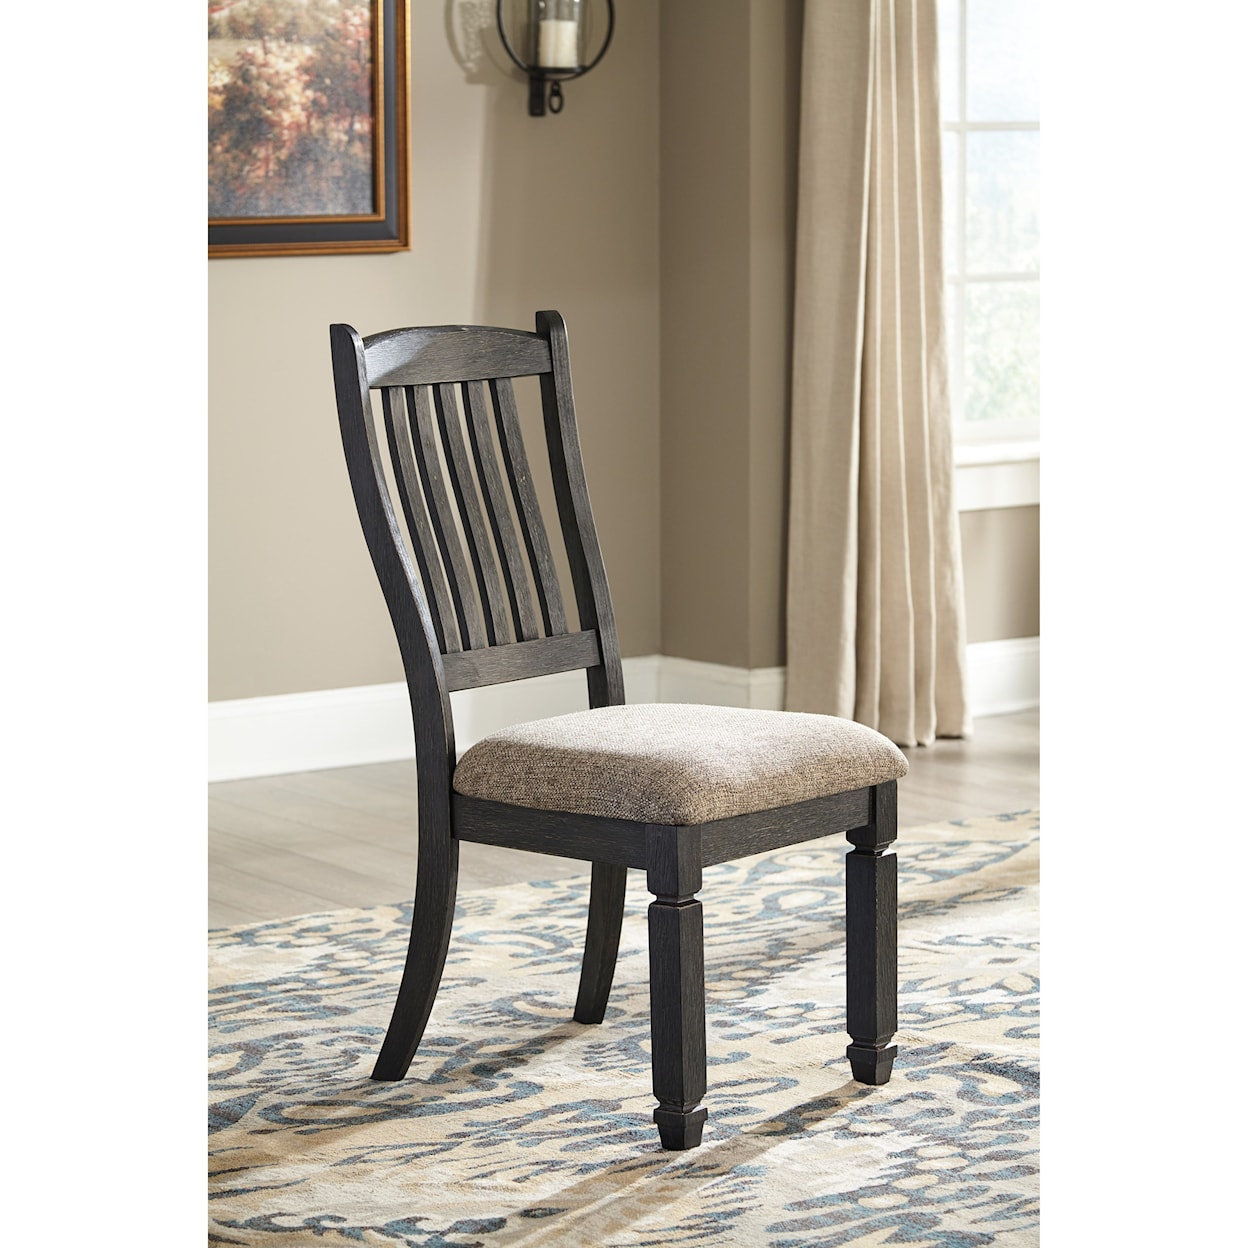 Michael Alan Select Tyler Creek 6-Piece Table and Chair Set